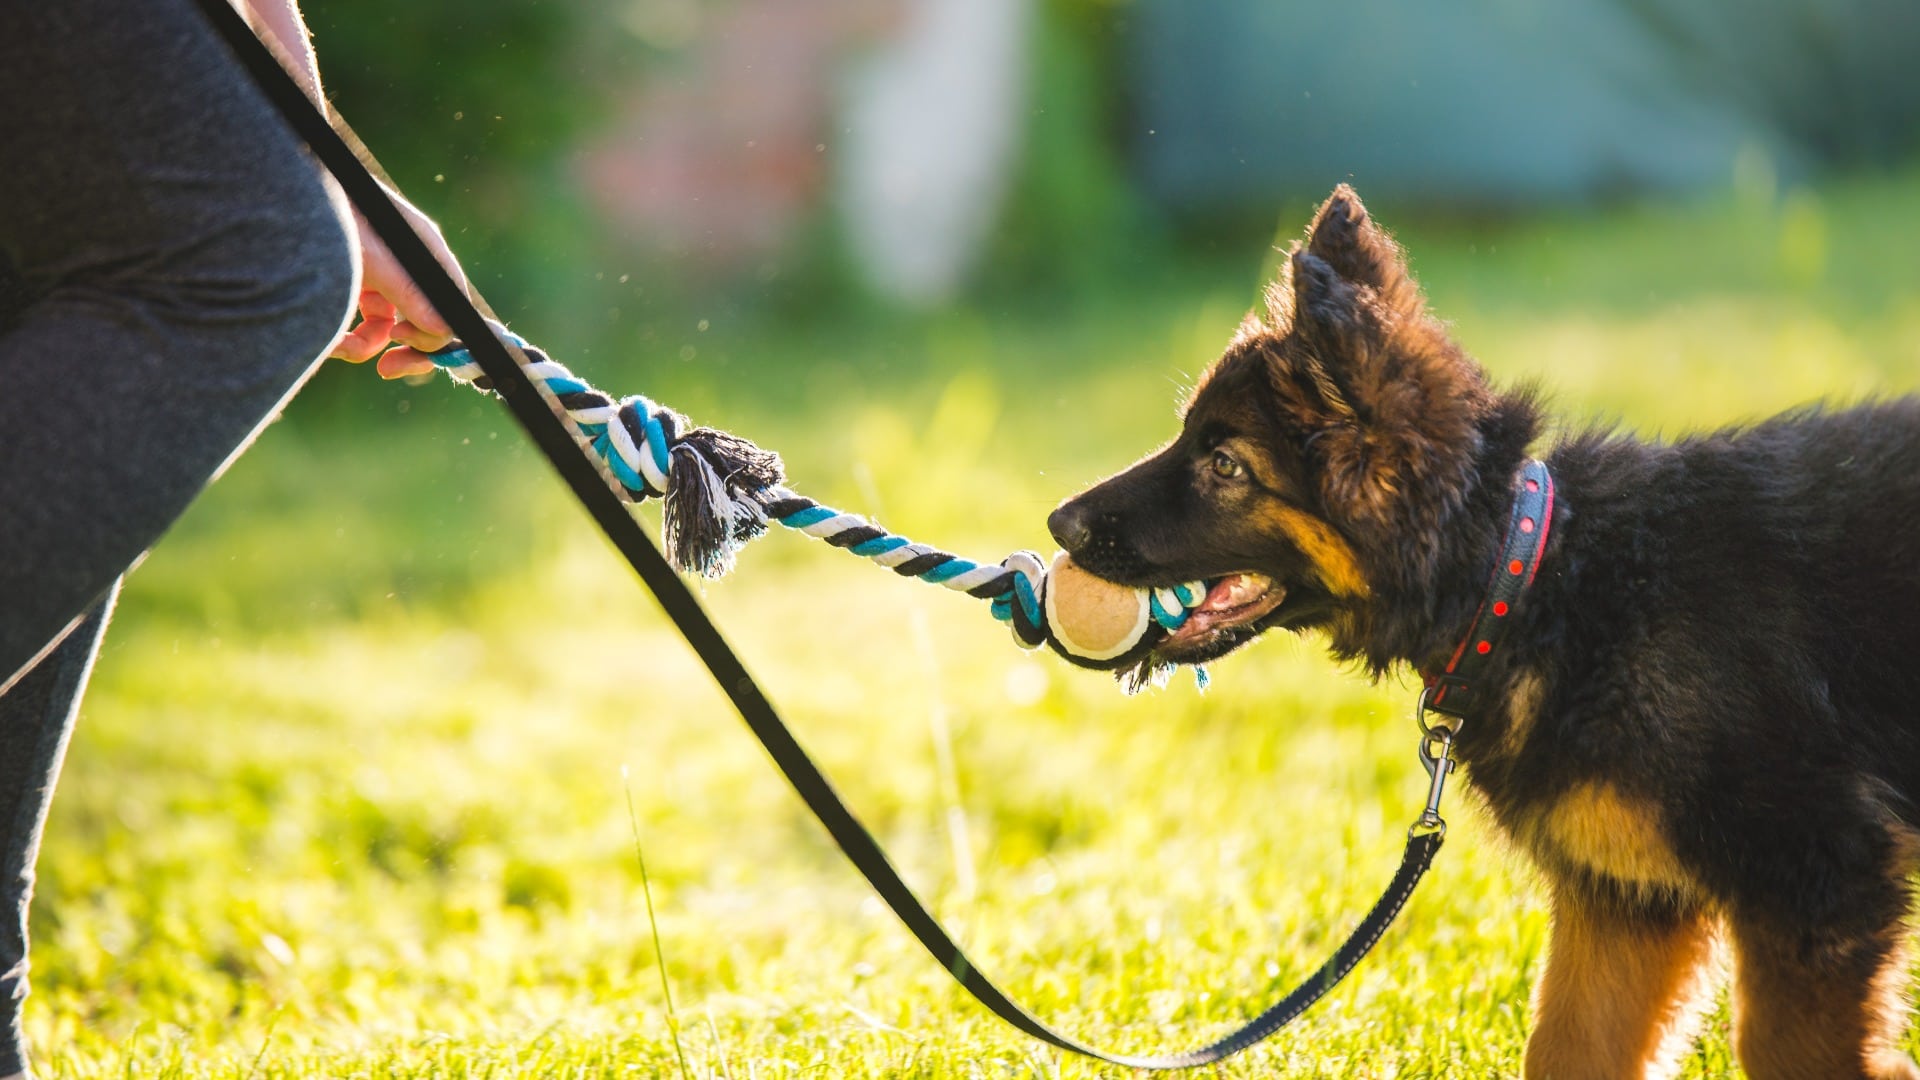 Young cute puppy of german shepherd dog during a puppy school training with the owner in the park, in beautiful light